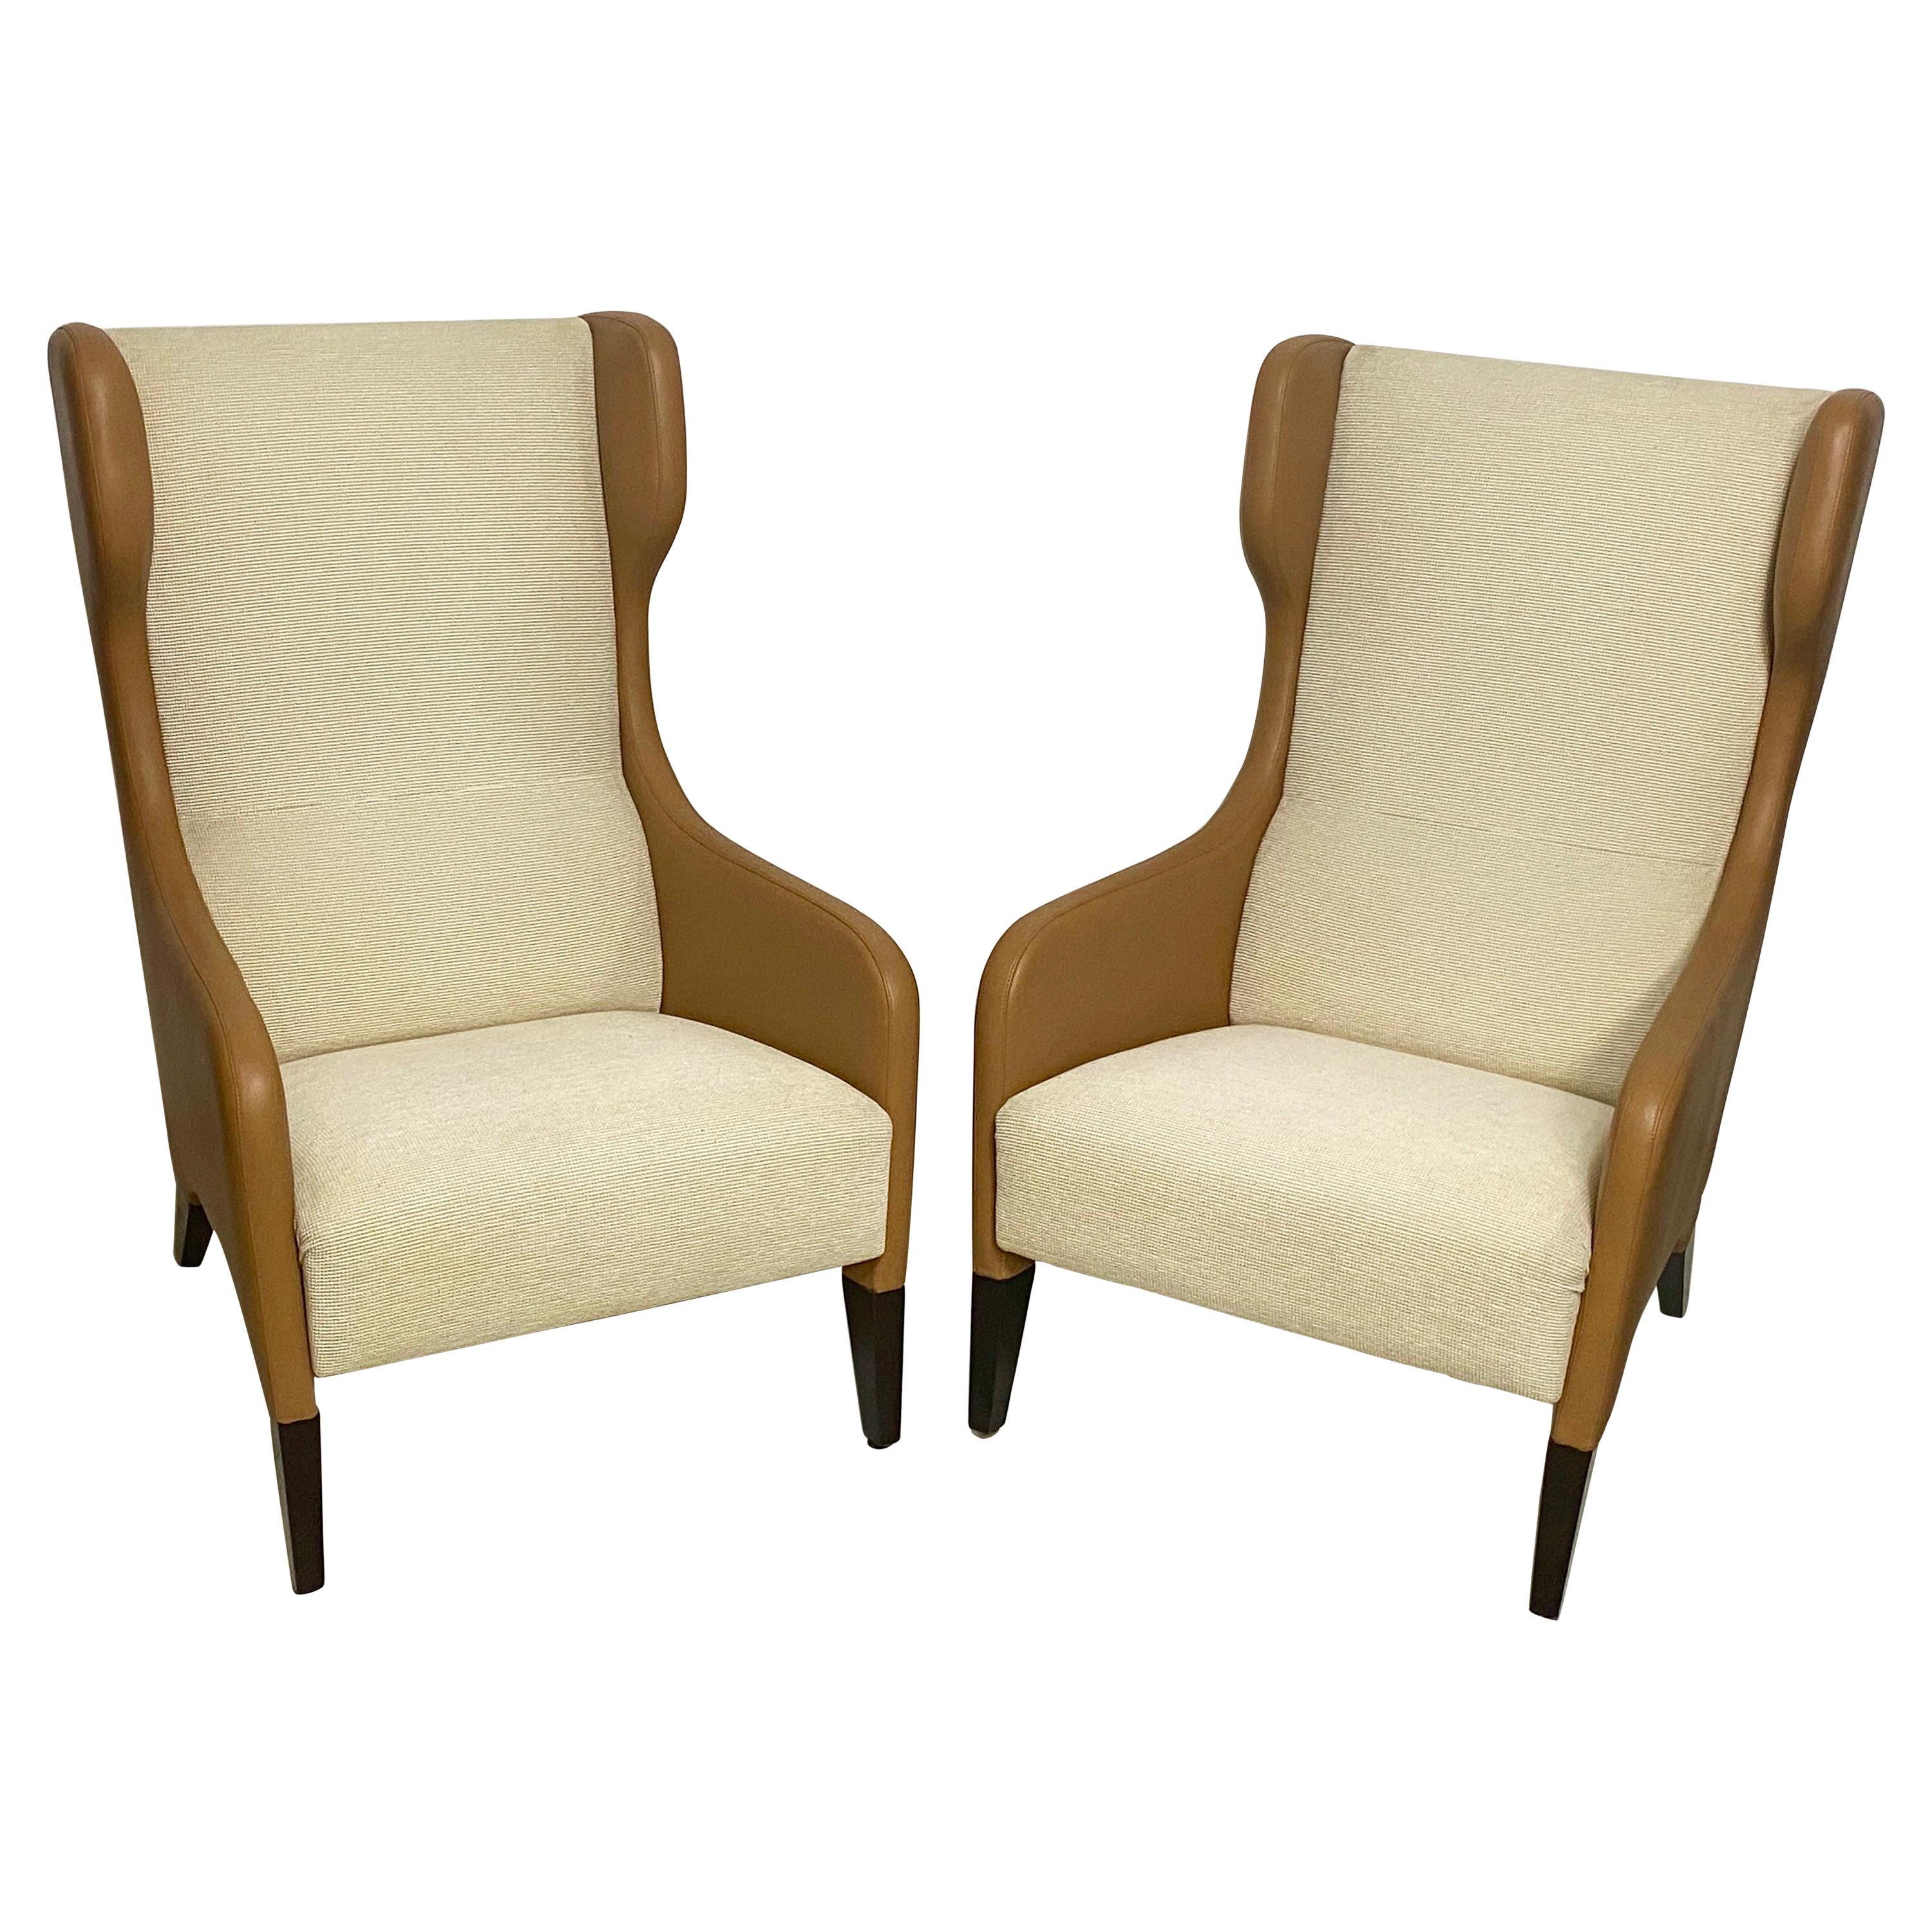 Pair of Modern Gio Ponti Style Leather and Upholstery Wingback Chairs For Sale